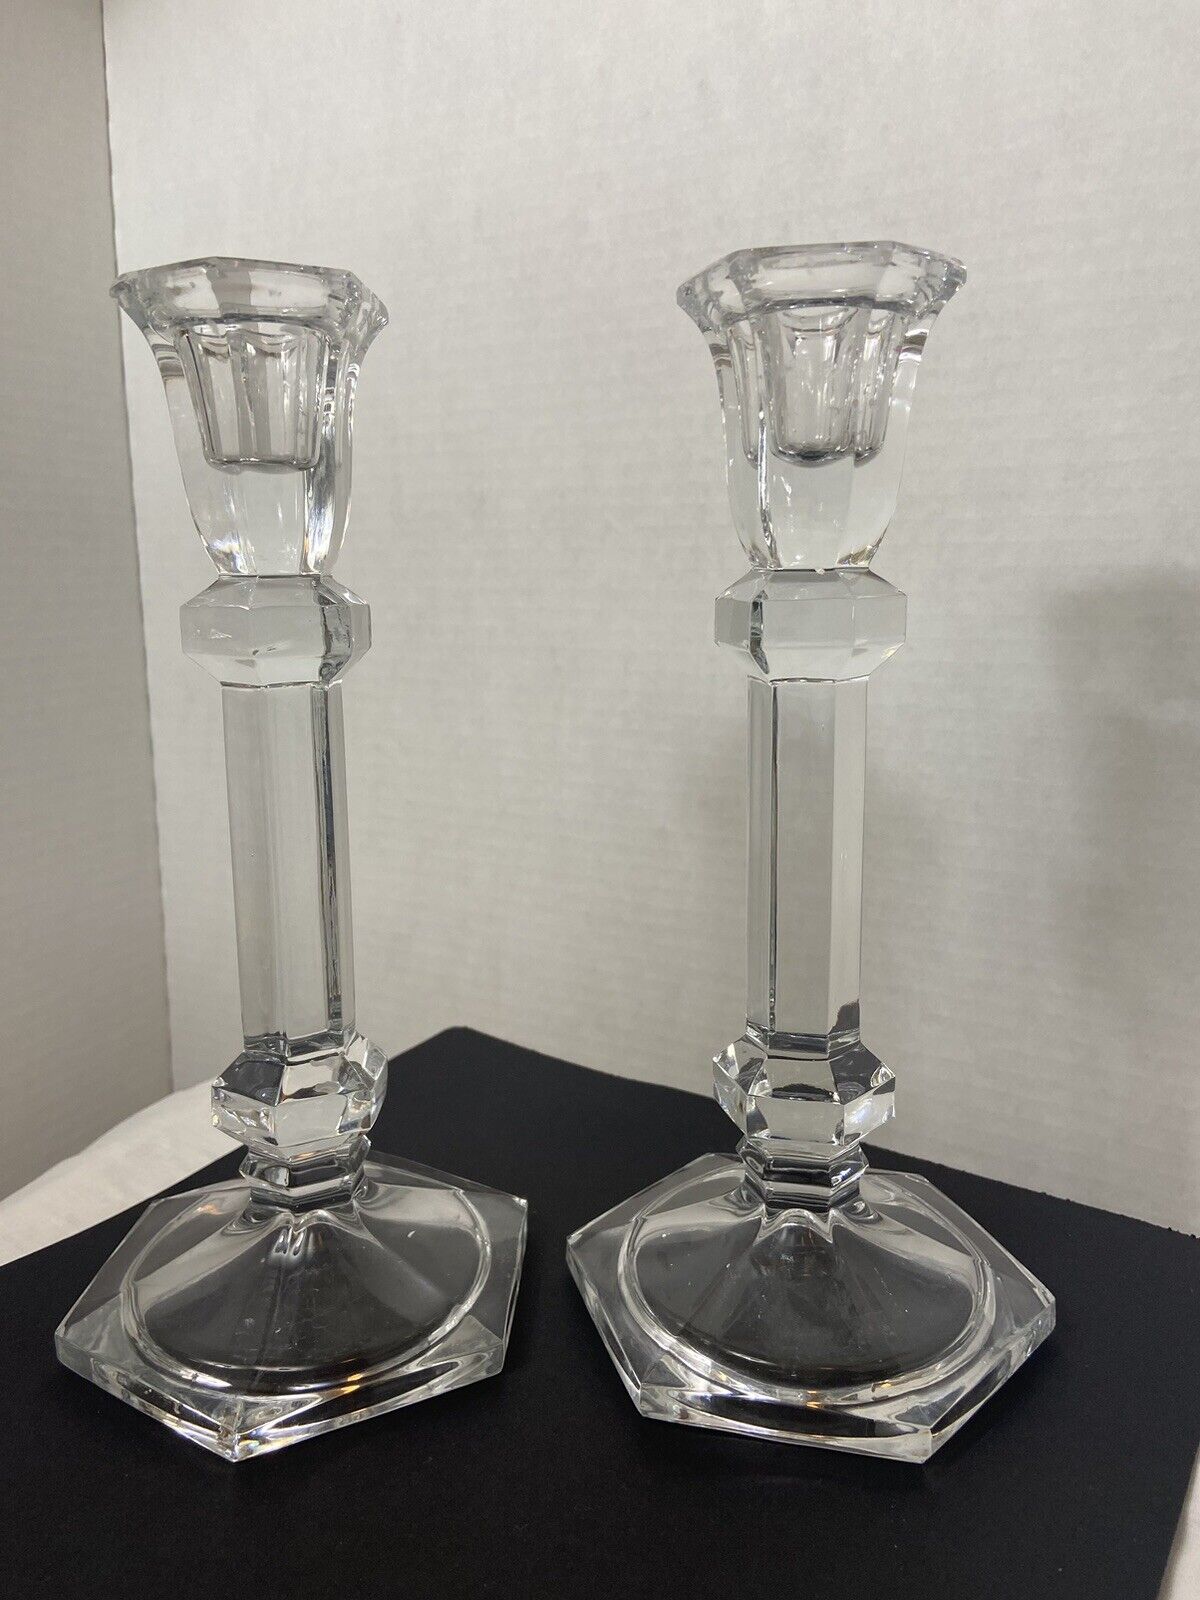 Vintage 2 Crystal Glass Taper Candlesticks Holders 8 1/2” Tall Beautiful Glass